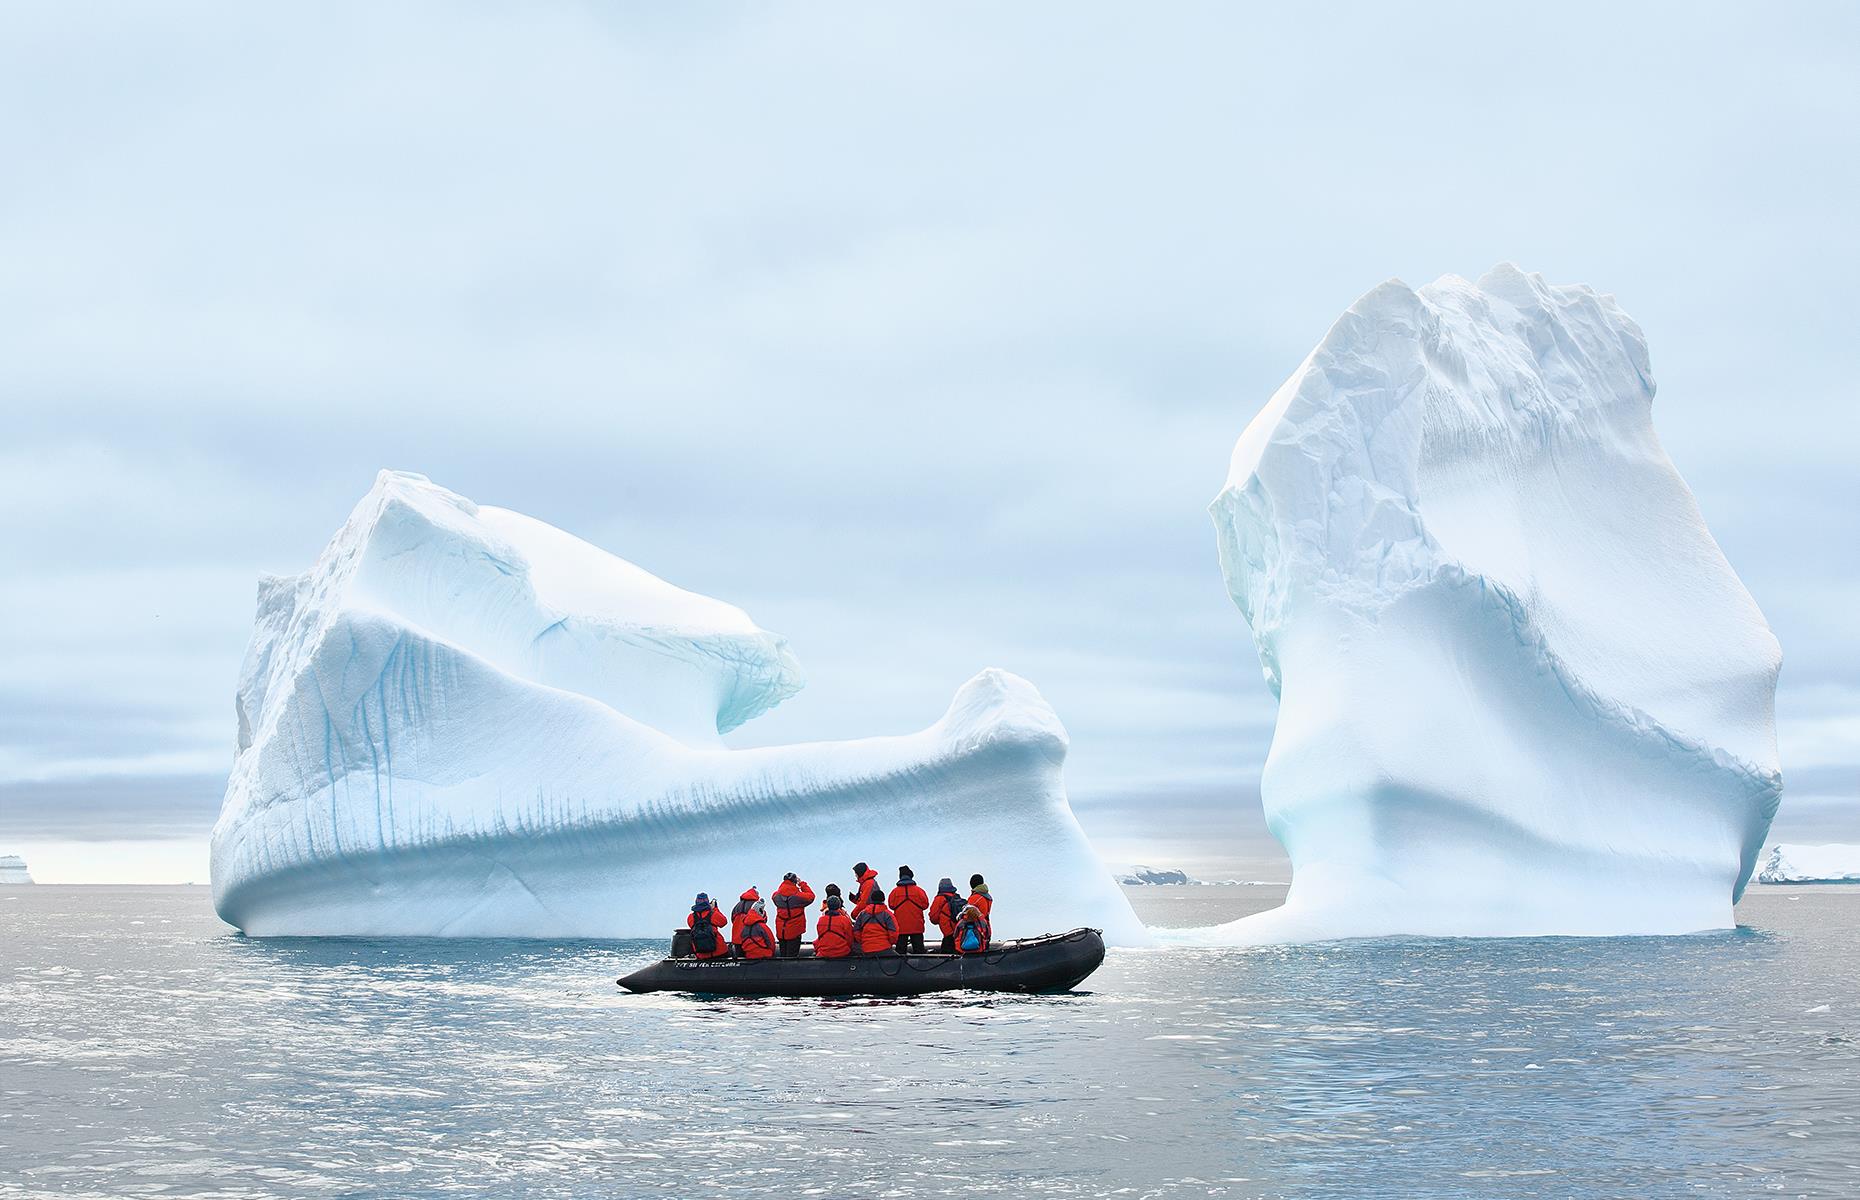 <p>Zodiacs – small, fast boats carried on ships – make it easy to explore different landscapes, whether it’s the frozen tundra or the Galapagos’ wildlife-dotted islands. Special mentions go to <a href="https://www.quarkexpeditions.com/gb/expedition-ships">Quark</a>, which uses environmentally friendly four-stroke engine zodiacs; <a href="https://www.sovereigncruise.co.uk/cruise-offers/cruise-lines/silversea-cruises-cruise-offers?infinity=gaw&gclid=CjwKCAiAzp6eBhByEiwA_gGq5KT8I_ANPmBAhrD8Rxb55wGxK9PqW3zMqsZG92sq3-VMSFggCgIMaBoCaJoQAvD_BwE">Silversea</a>, famous for its expert-led zodiac excursions, and <a href="https://www.aexpeditions.co.uk">AE Expeditions</a> – the line’s new expedition ship Sylvia Earle has 15 zodiacs. A seven-day Spitsbergen sailing with Quark costs from £4,500 ($5,547).</p>